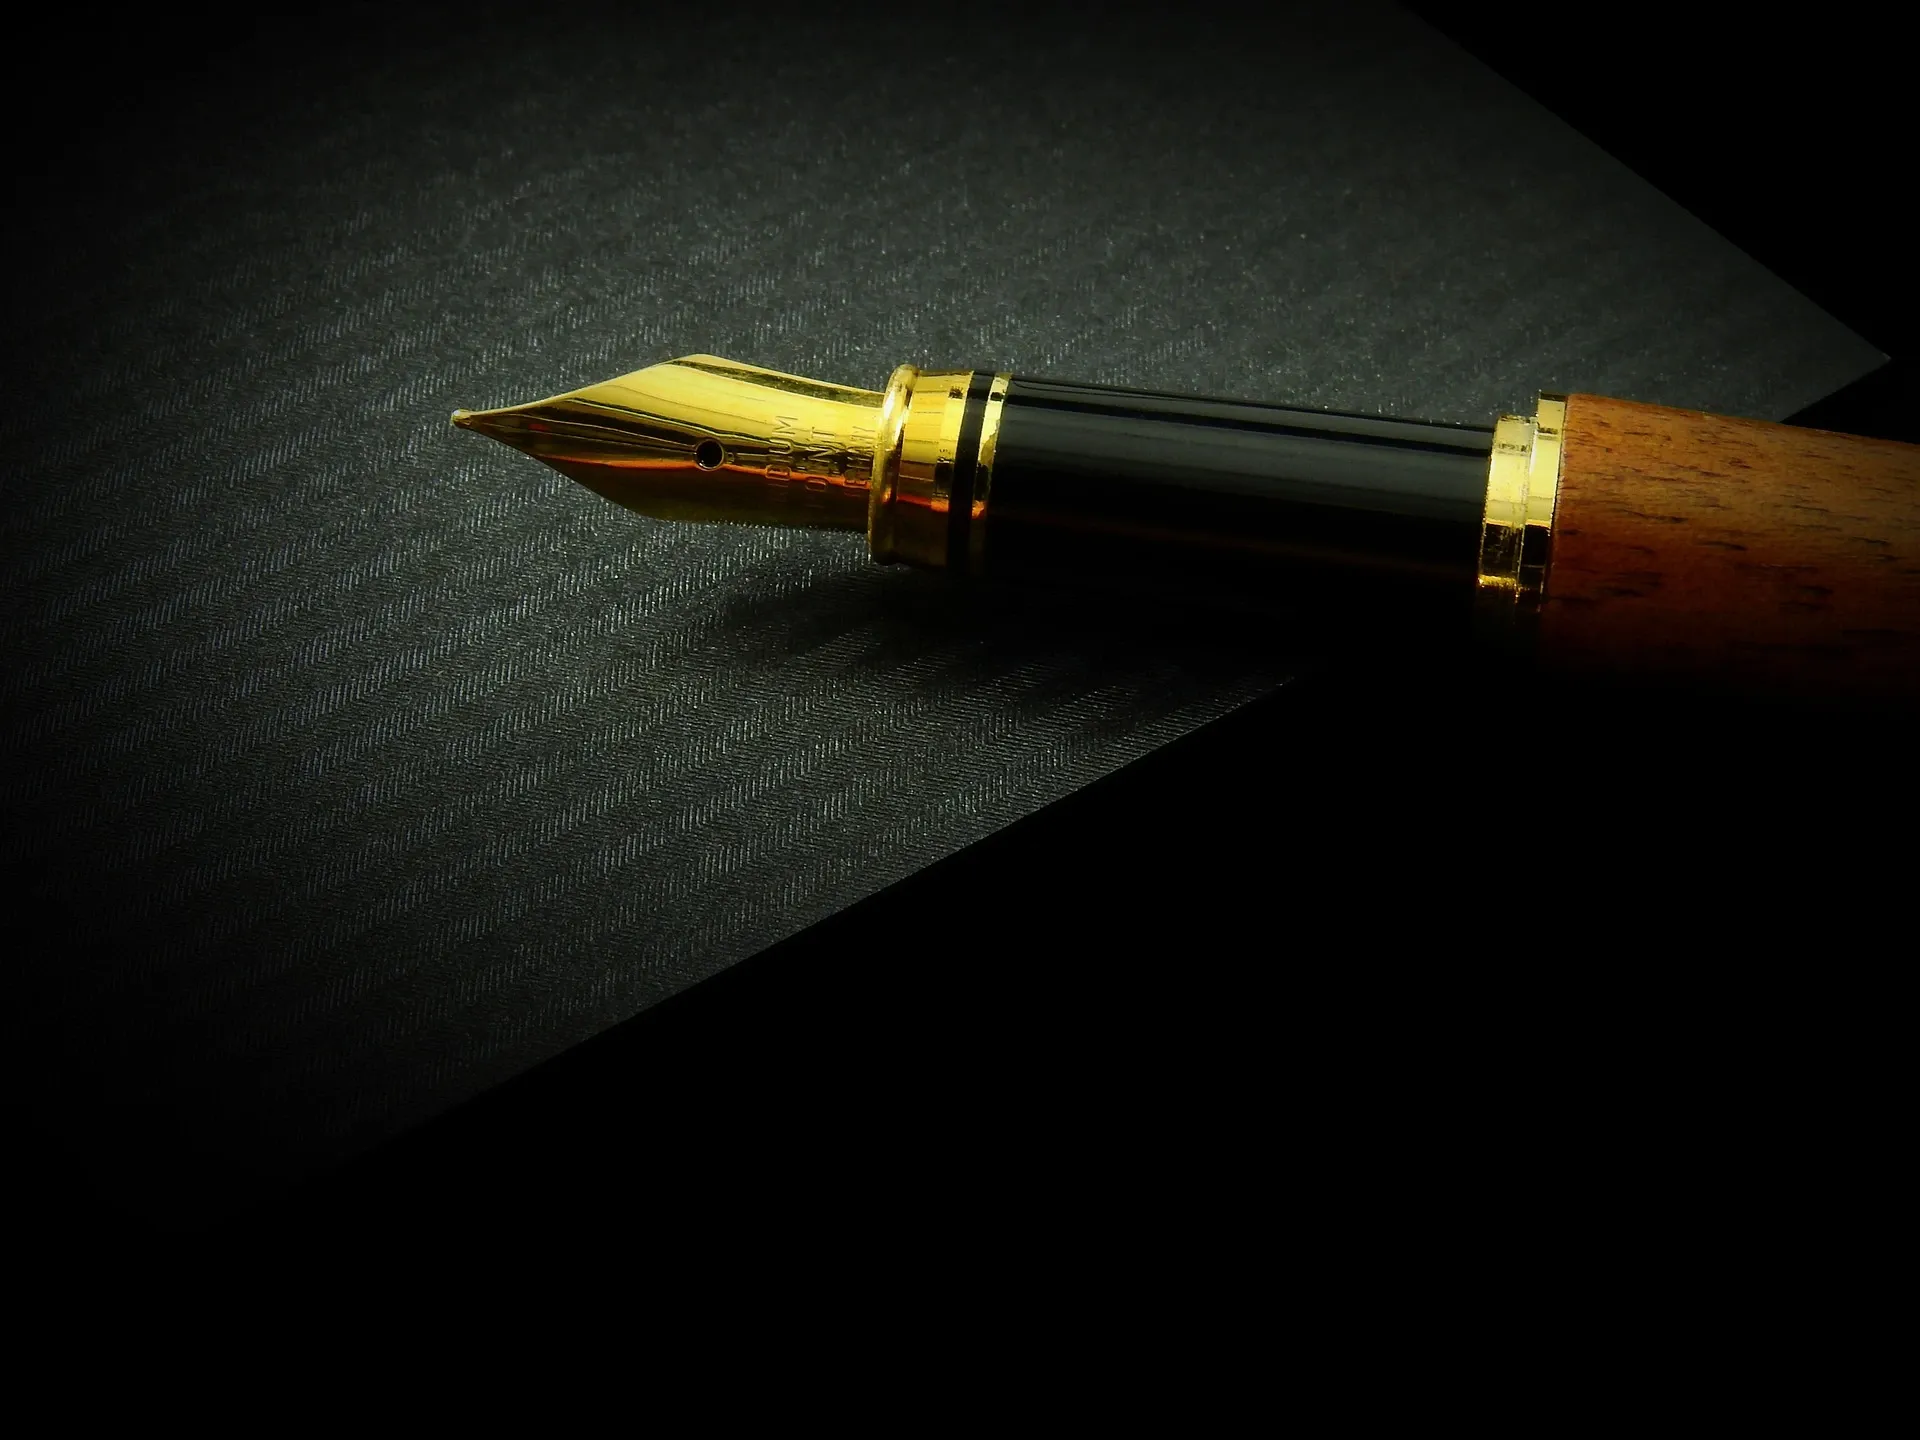 Image of a writer's pen on a black background